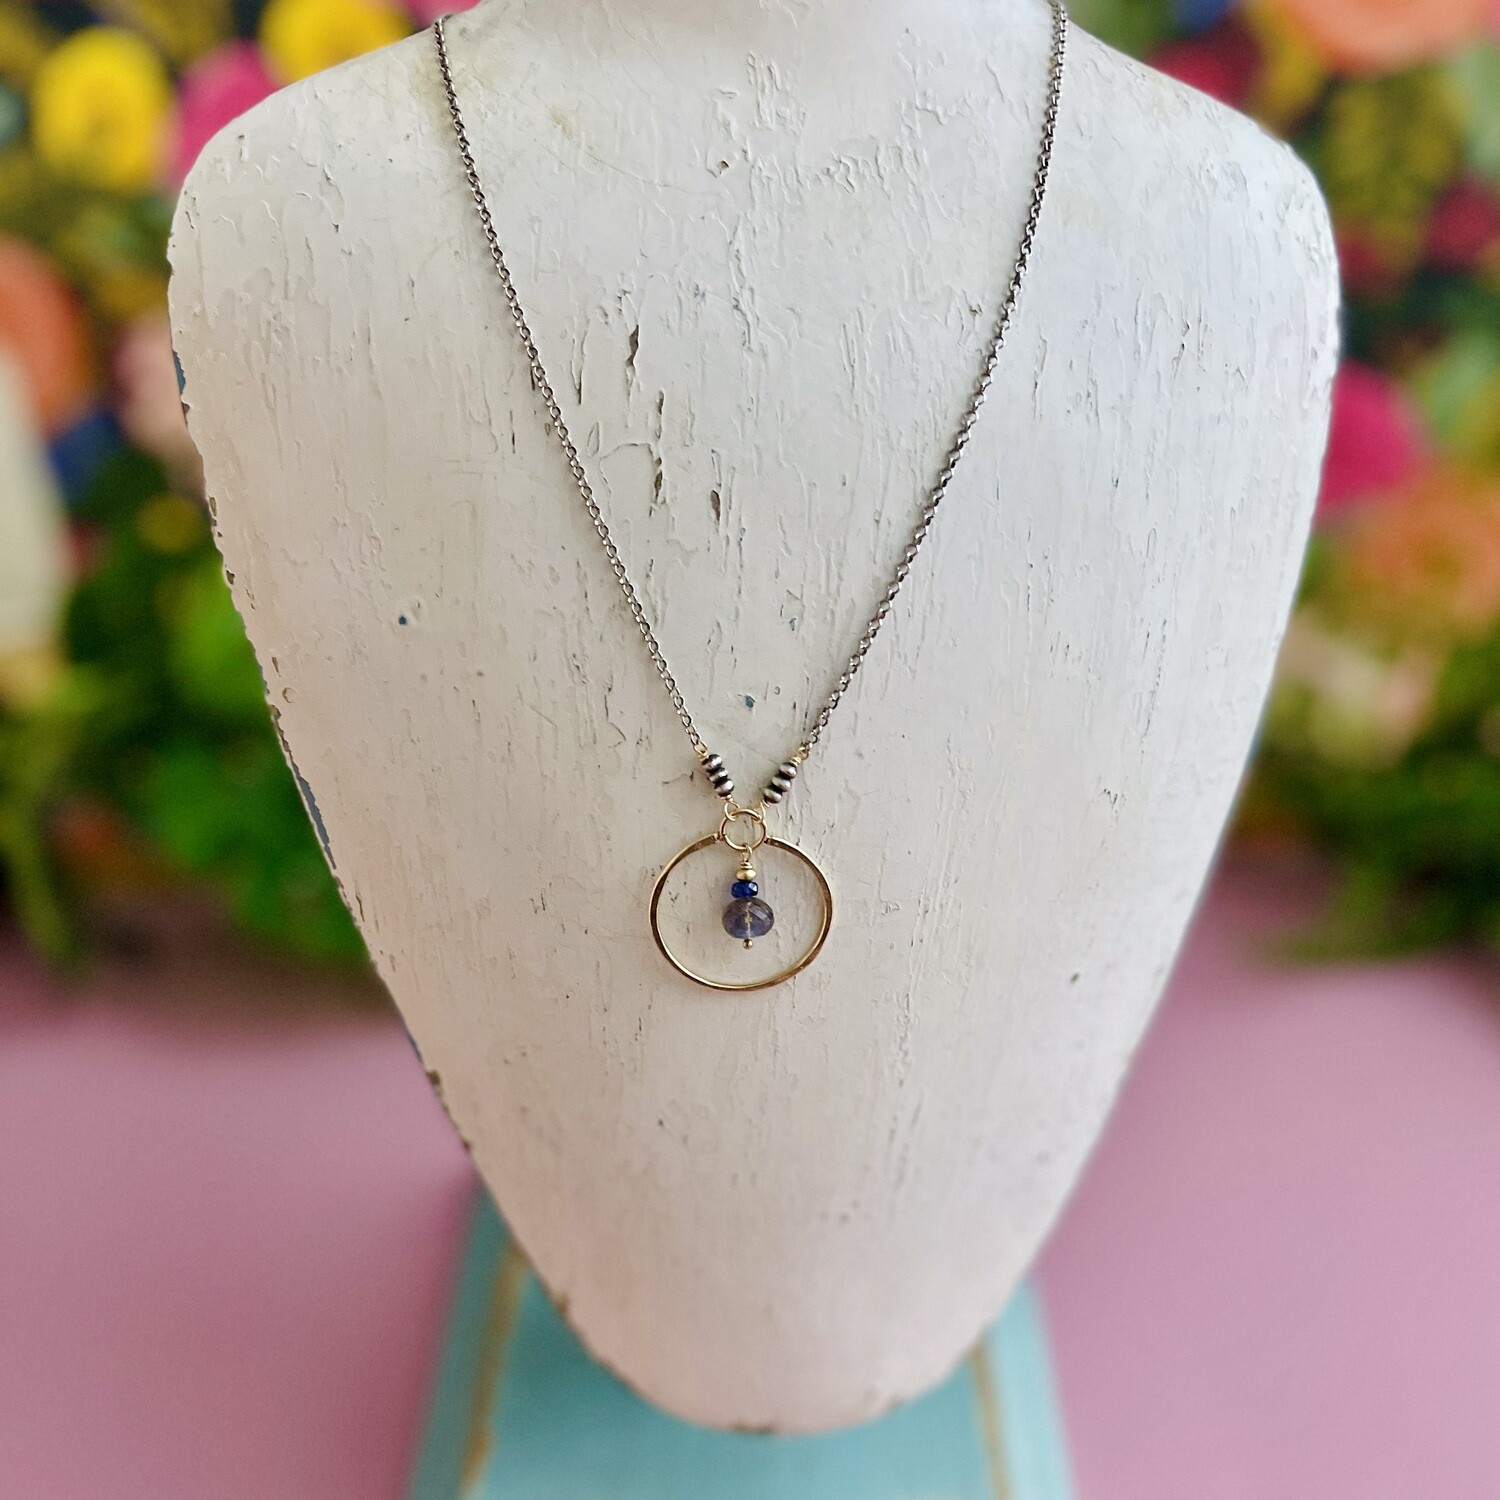 Handmade Labradorite and blue sapphire in 14kt gold filled necklace